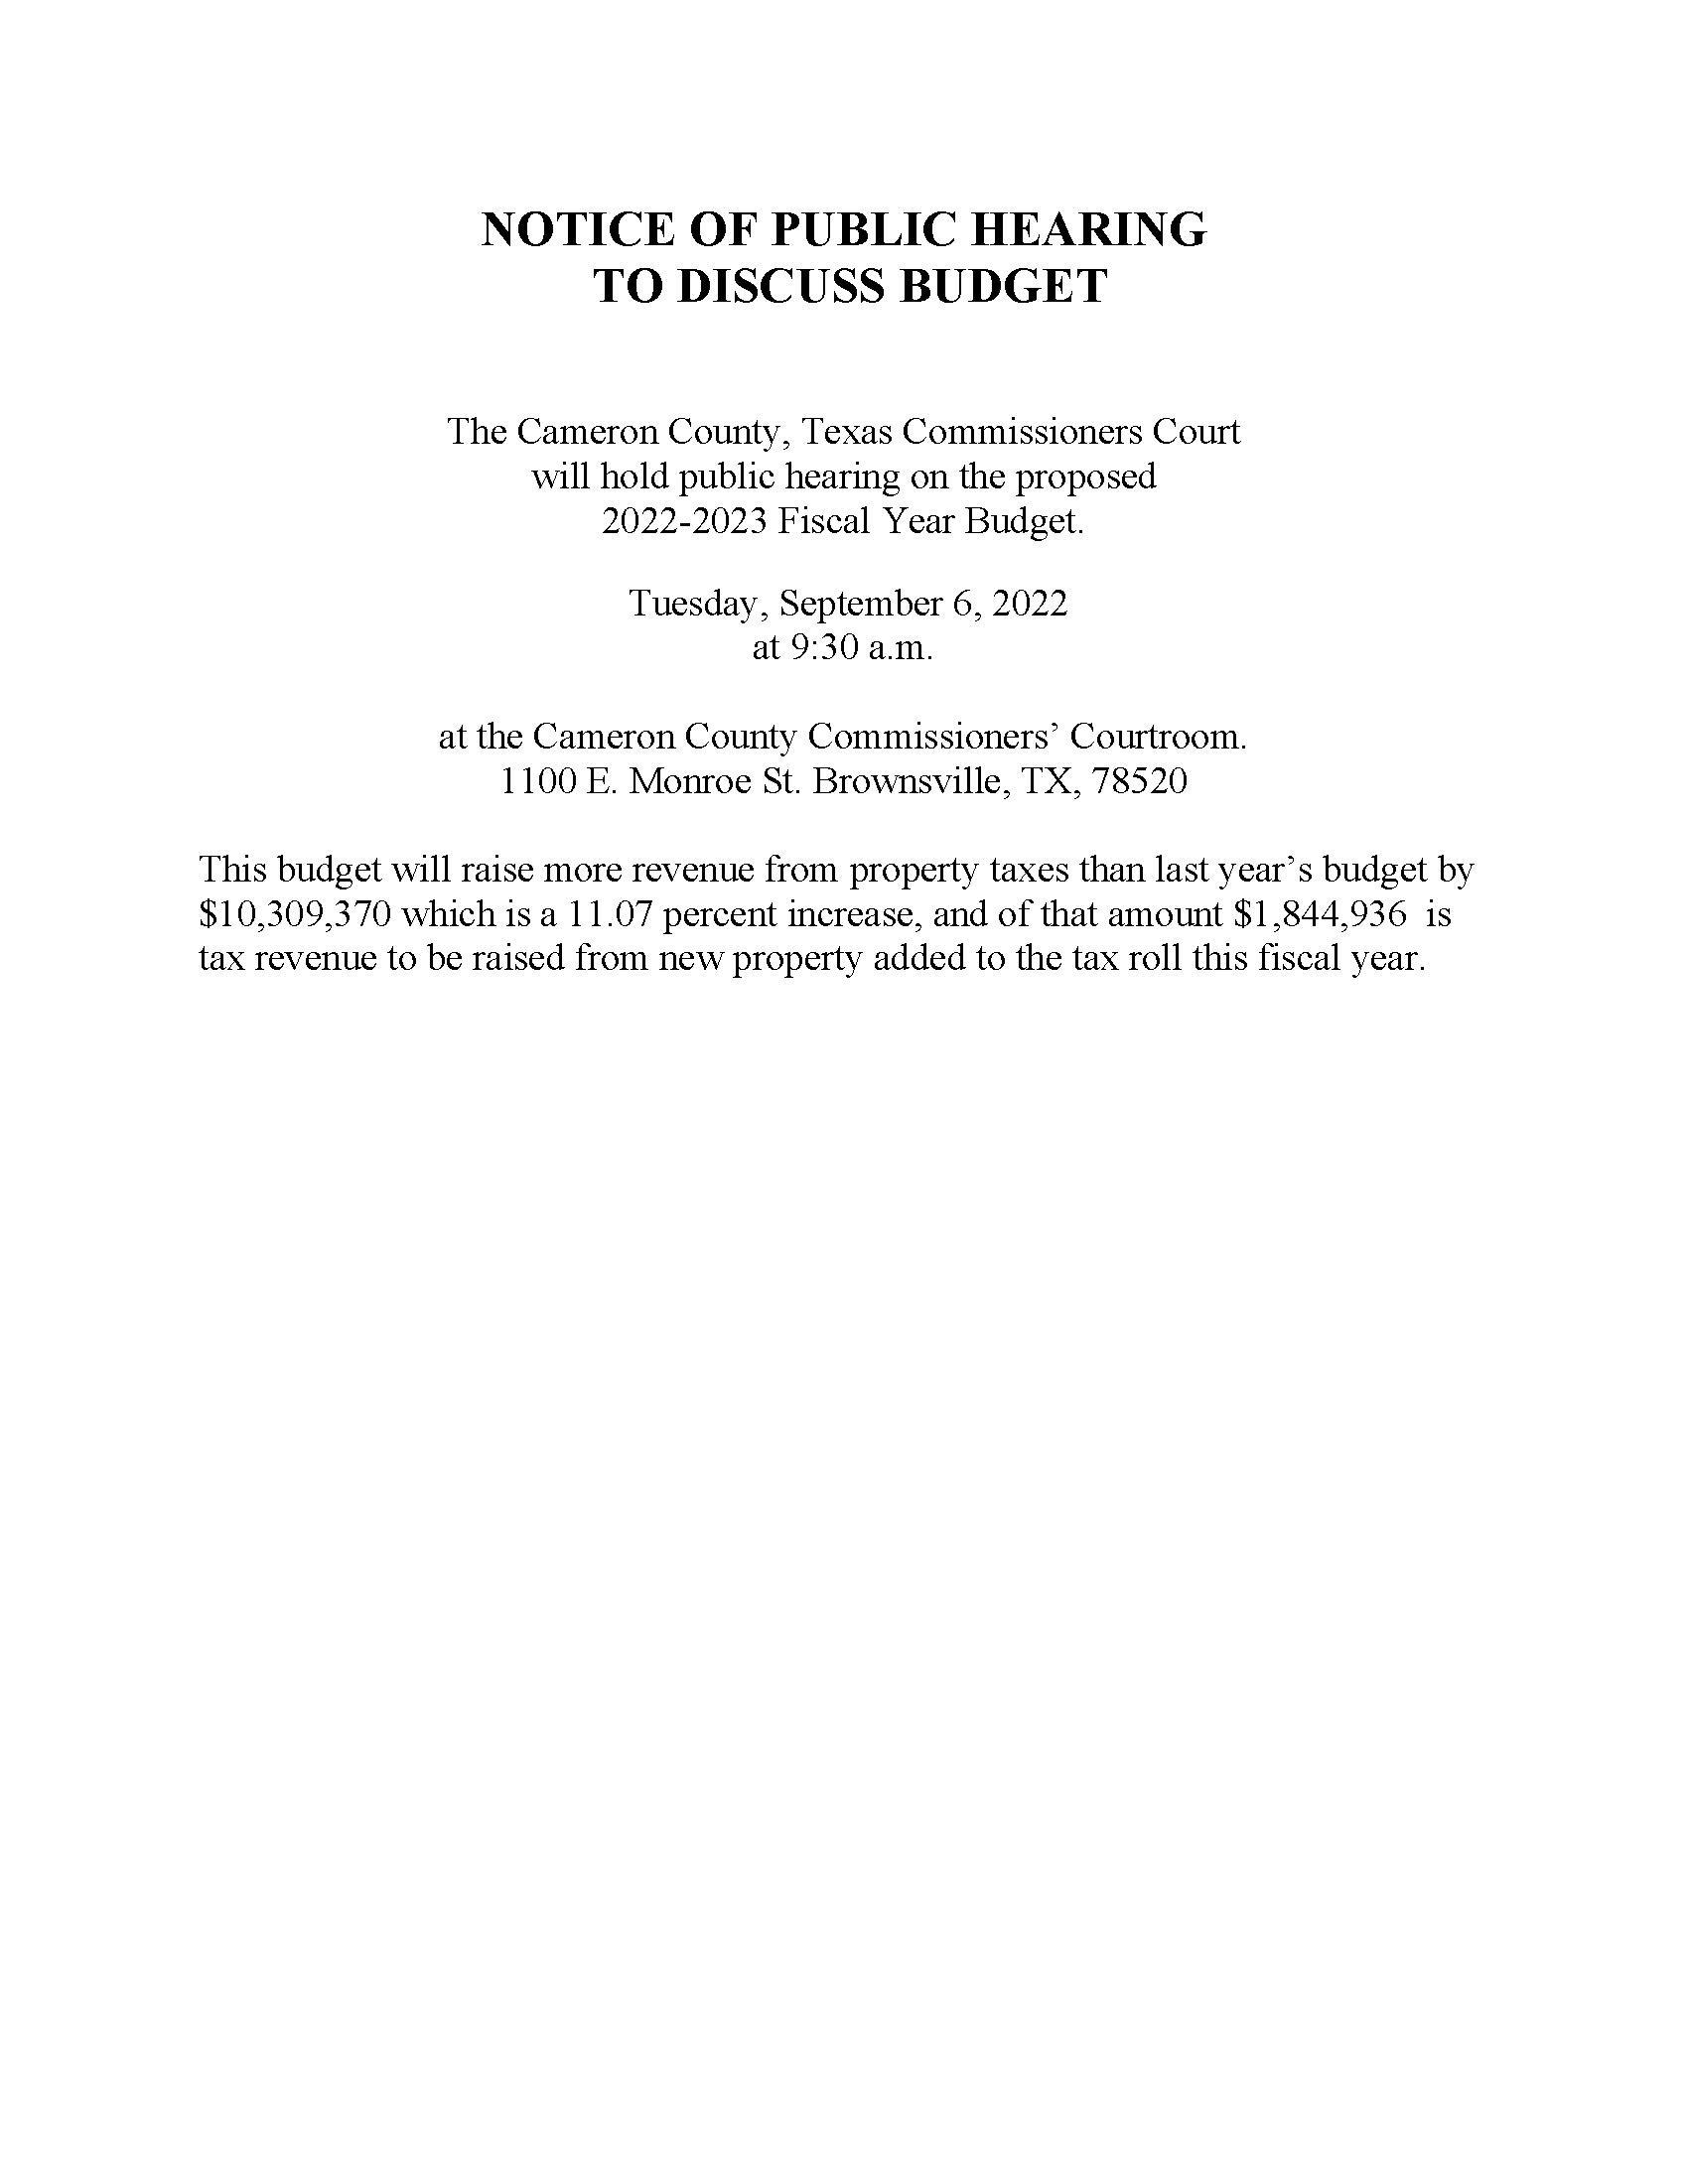 2022 2023 NOTICE OF PUBLIC HEARING BUDGET